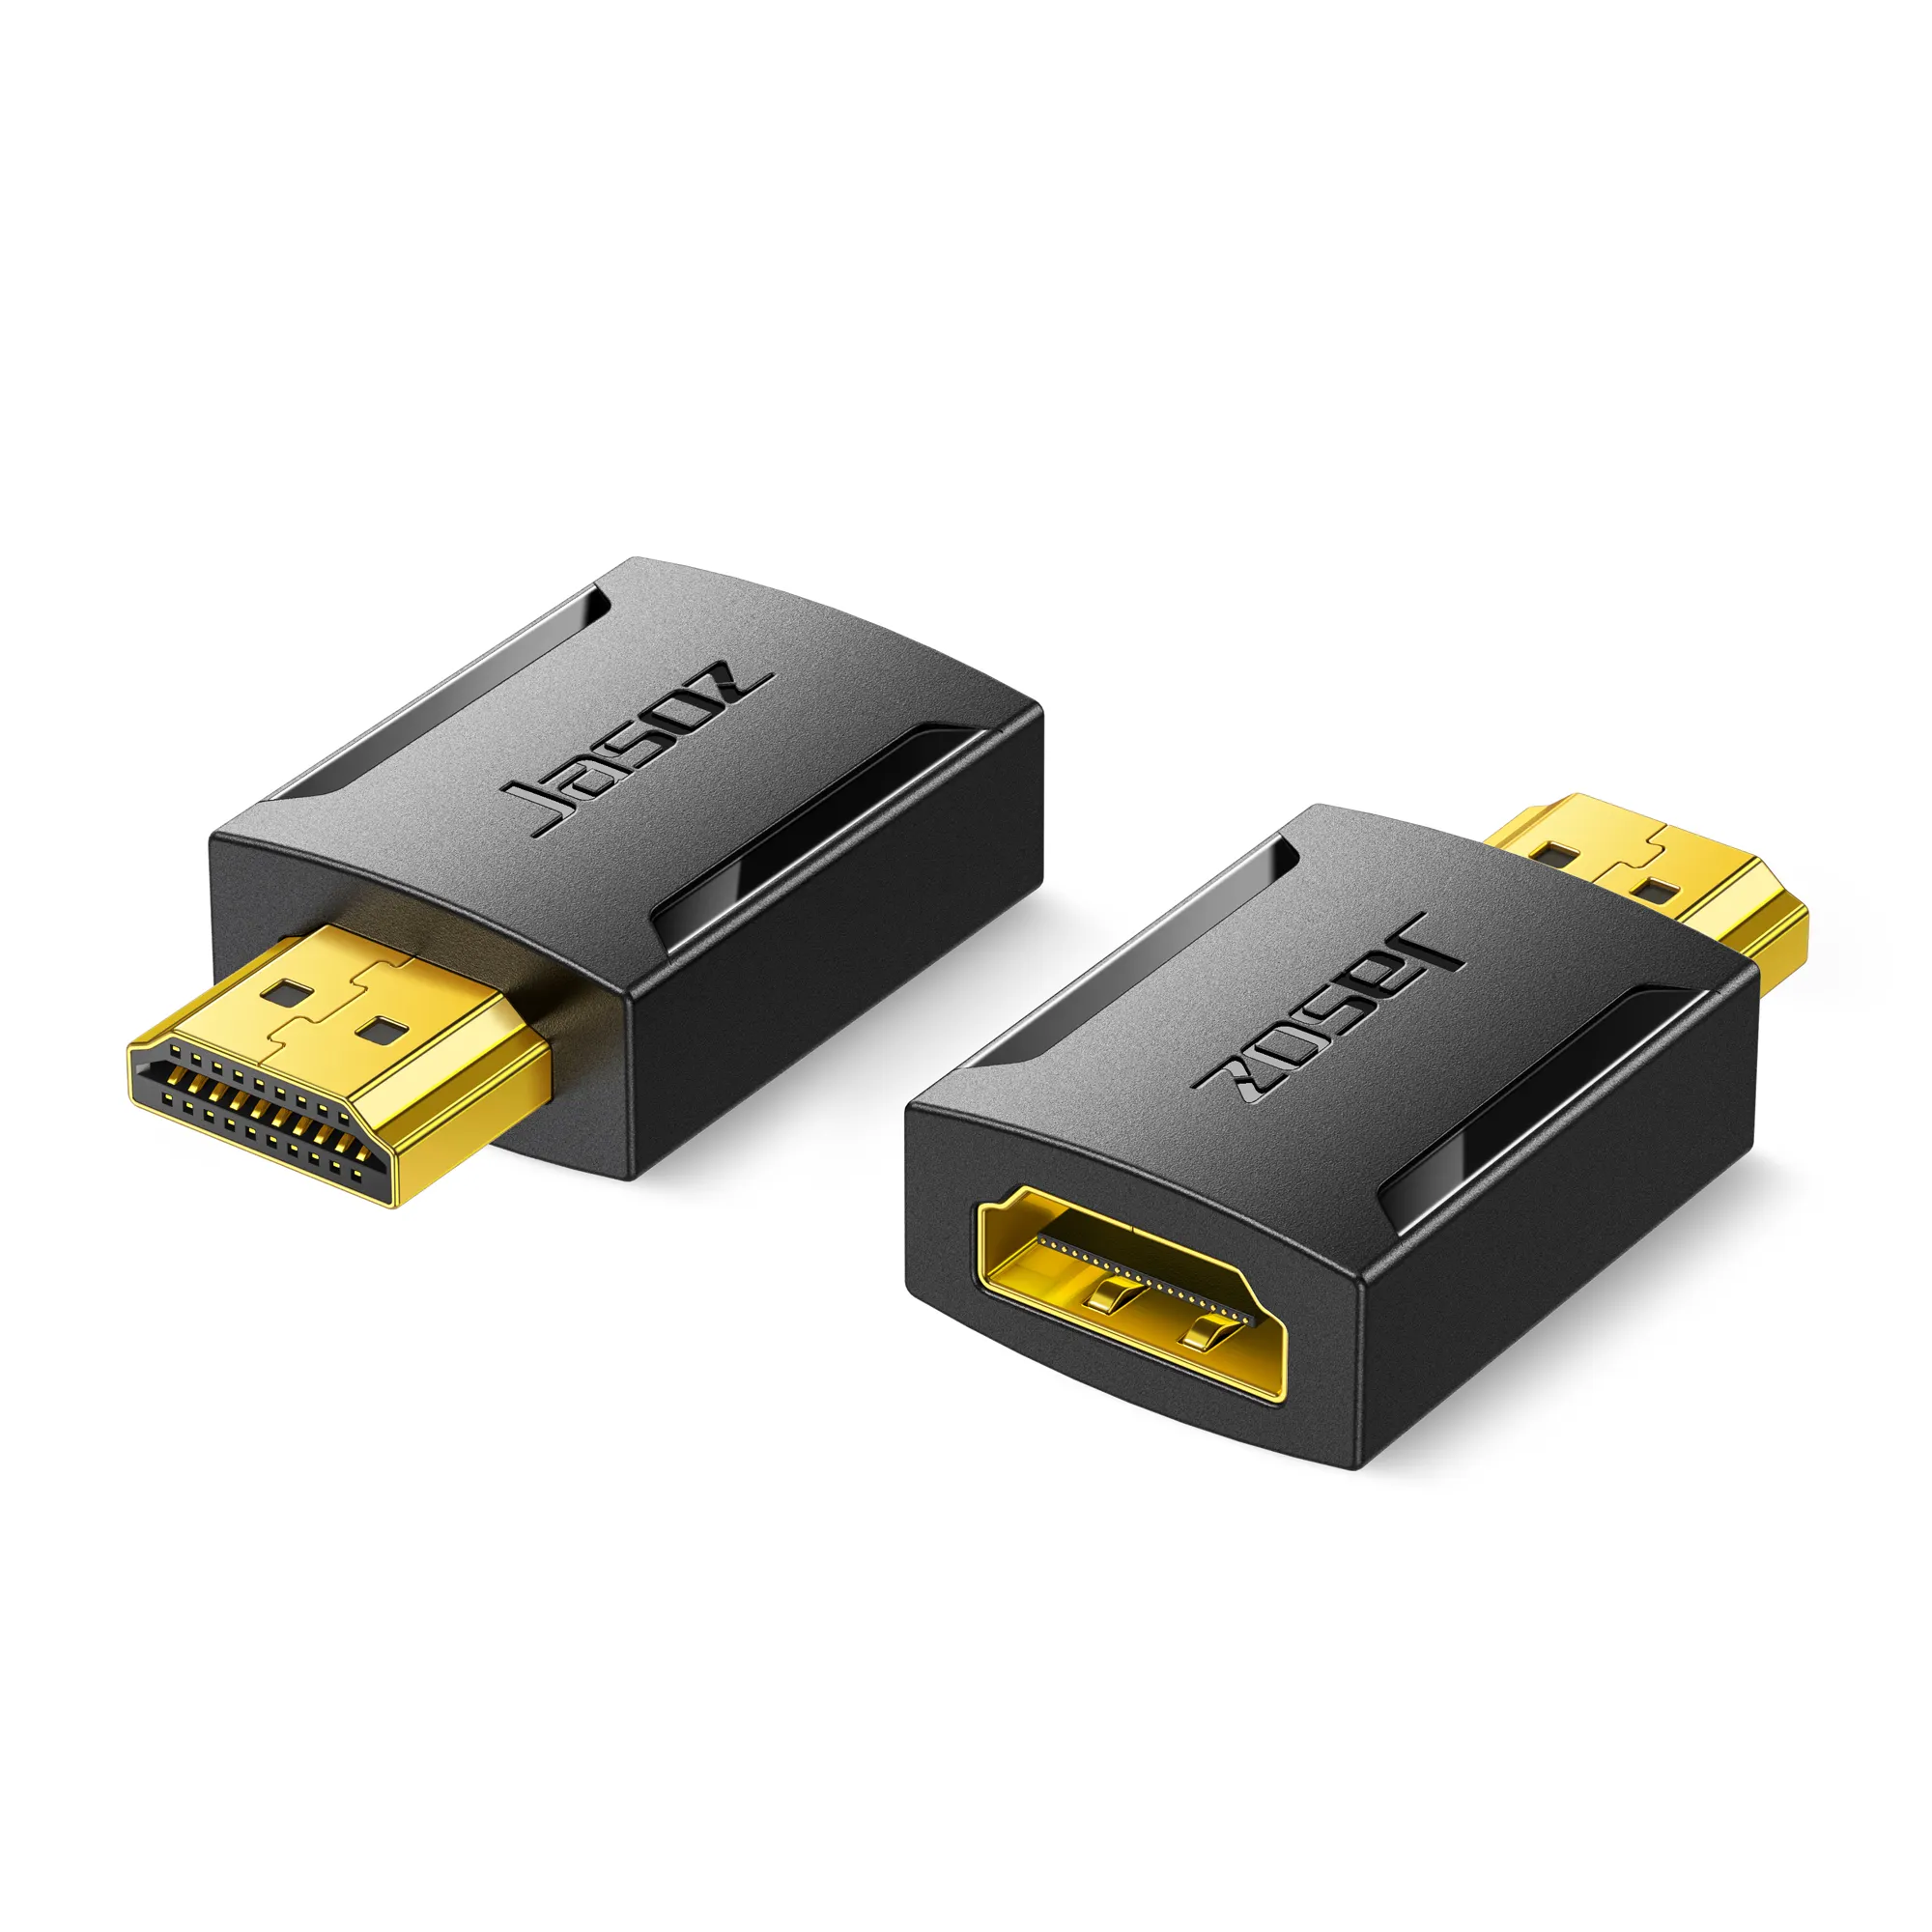 Jasoz Gold Plated 4K 60HZ HDMI Male to HDMI Female Converter Adapter HDMI Audio Video for PC Laptop Table